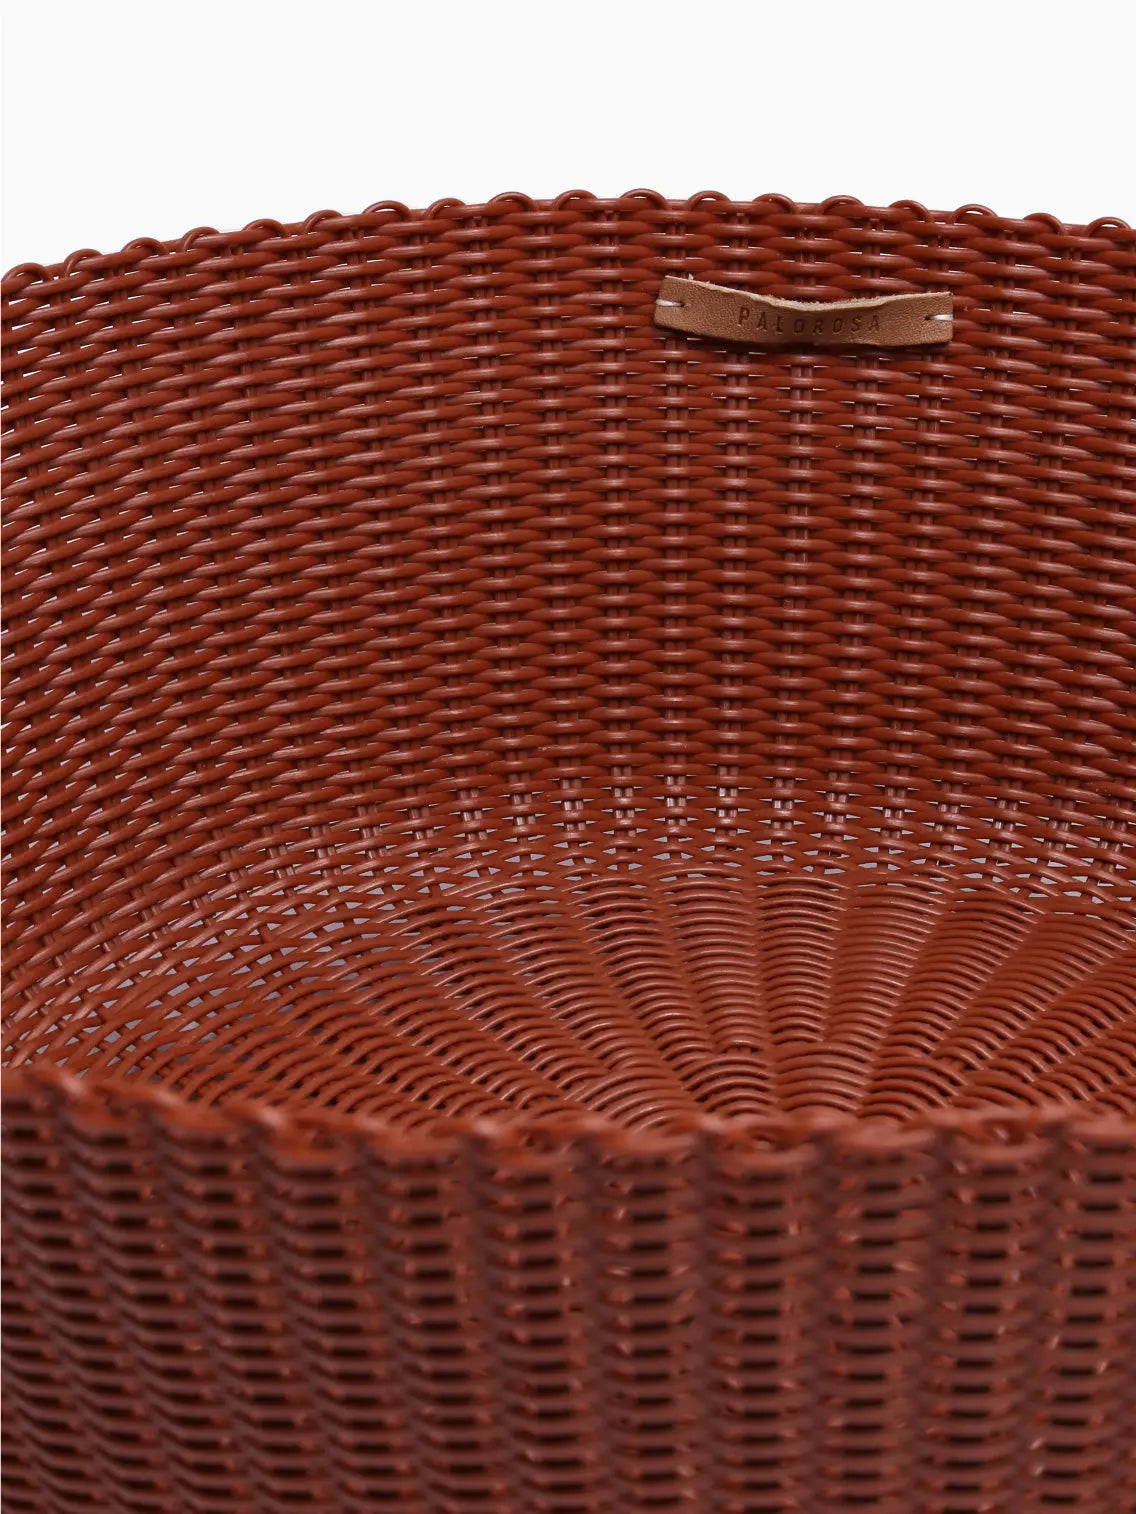 A round, brown wicker basket with a wide opening and textured pattern is displayed on a light, plain background. The Fruit Basket Large Clay by Palorosa, available at Bassalstore Barcelona, appears empty and features an intricate woven design.